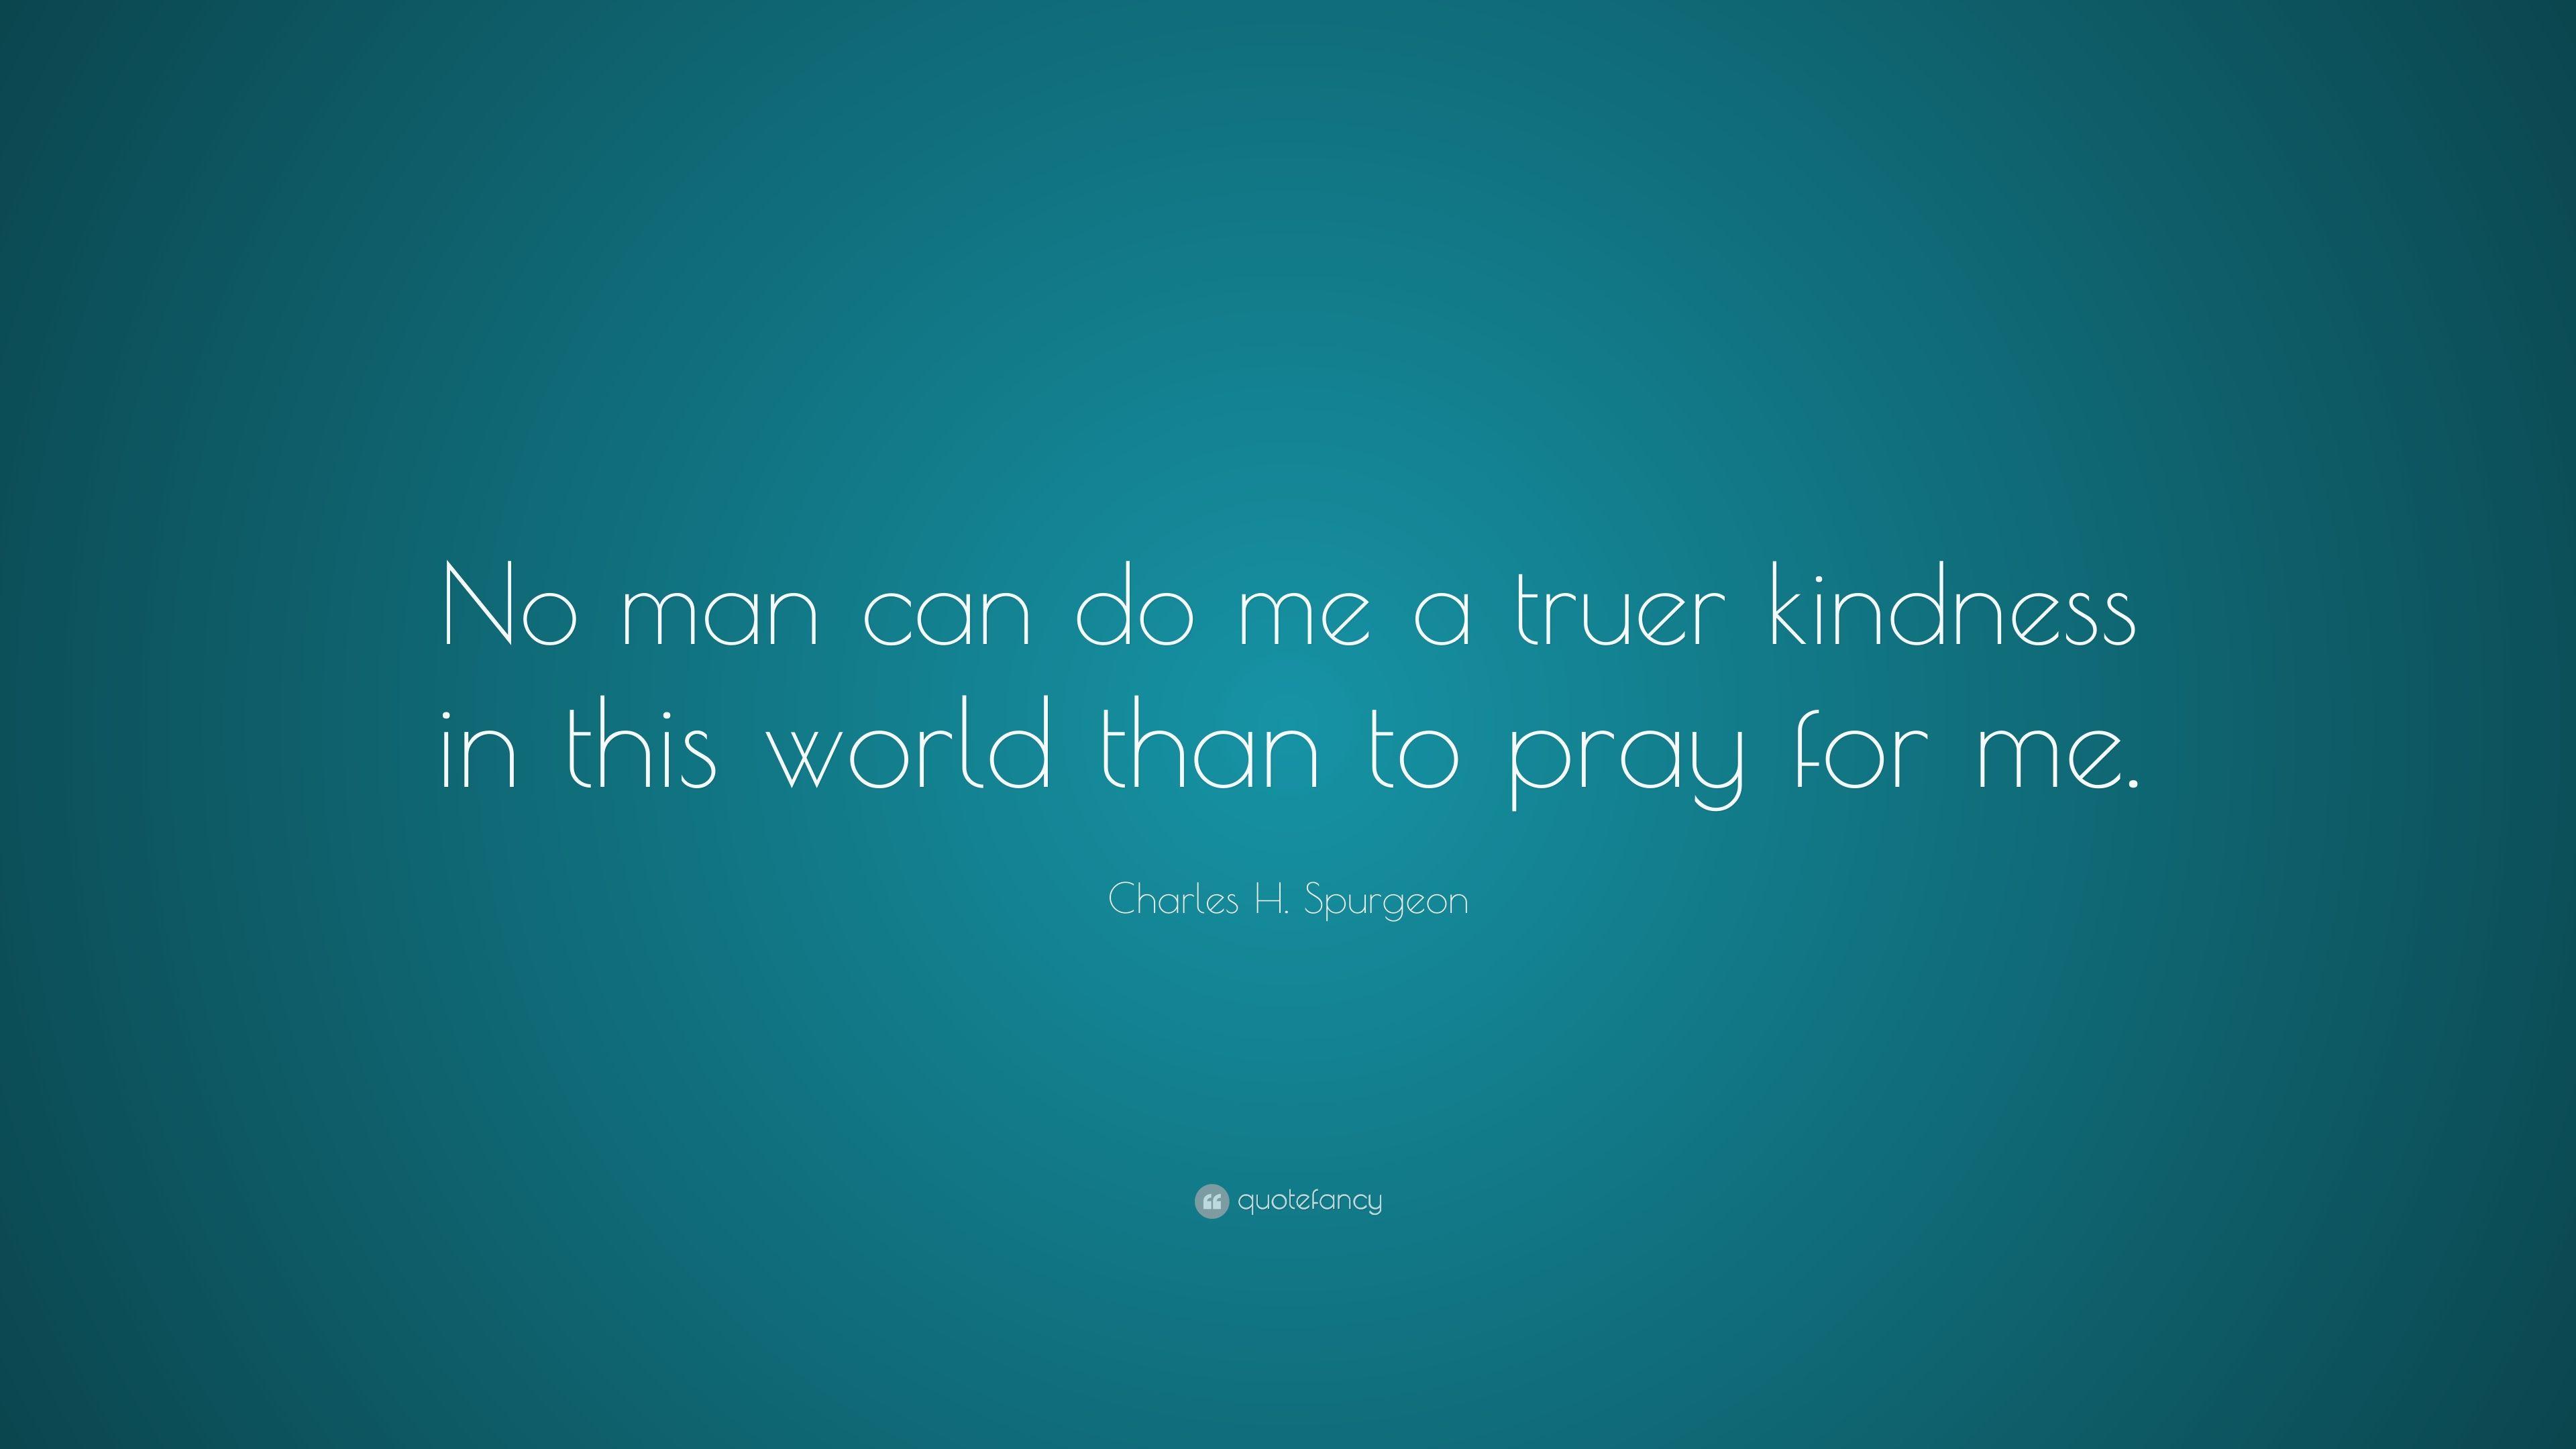 Charles H. Spurgeon Quote: “No man can do me a truer kindness